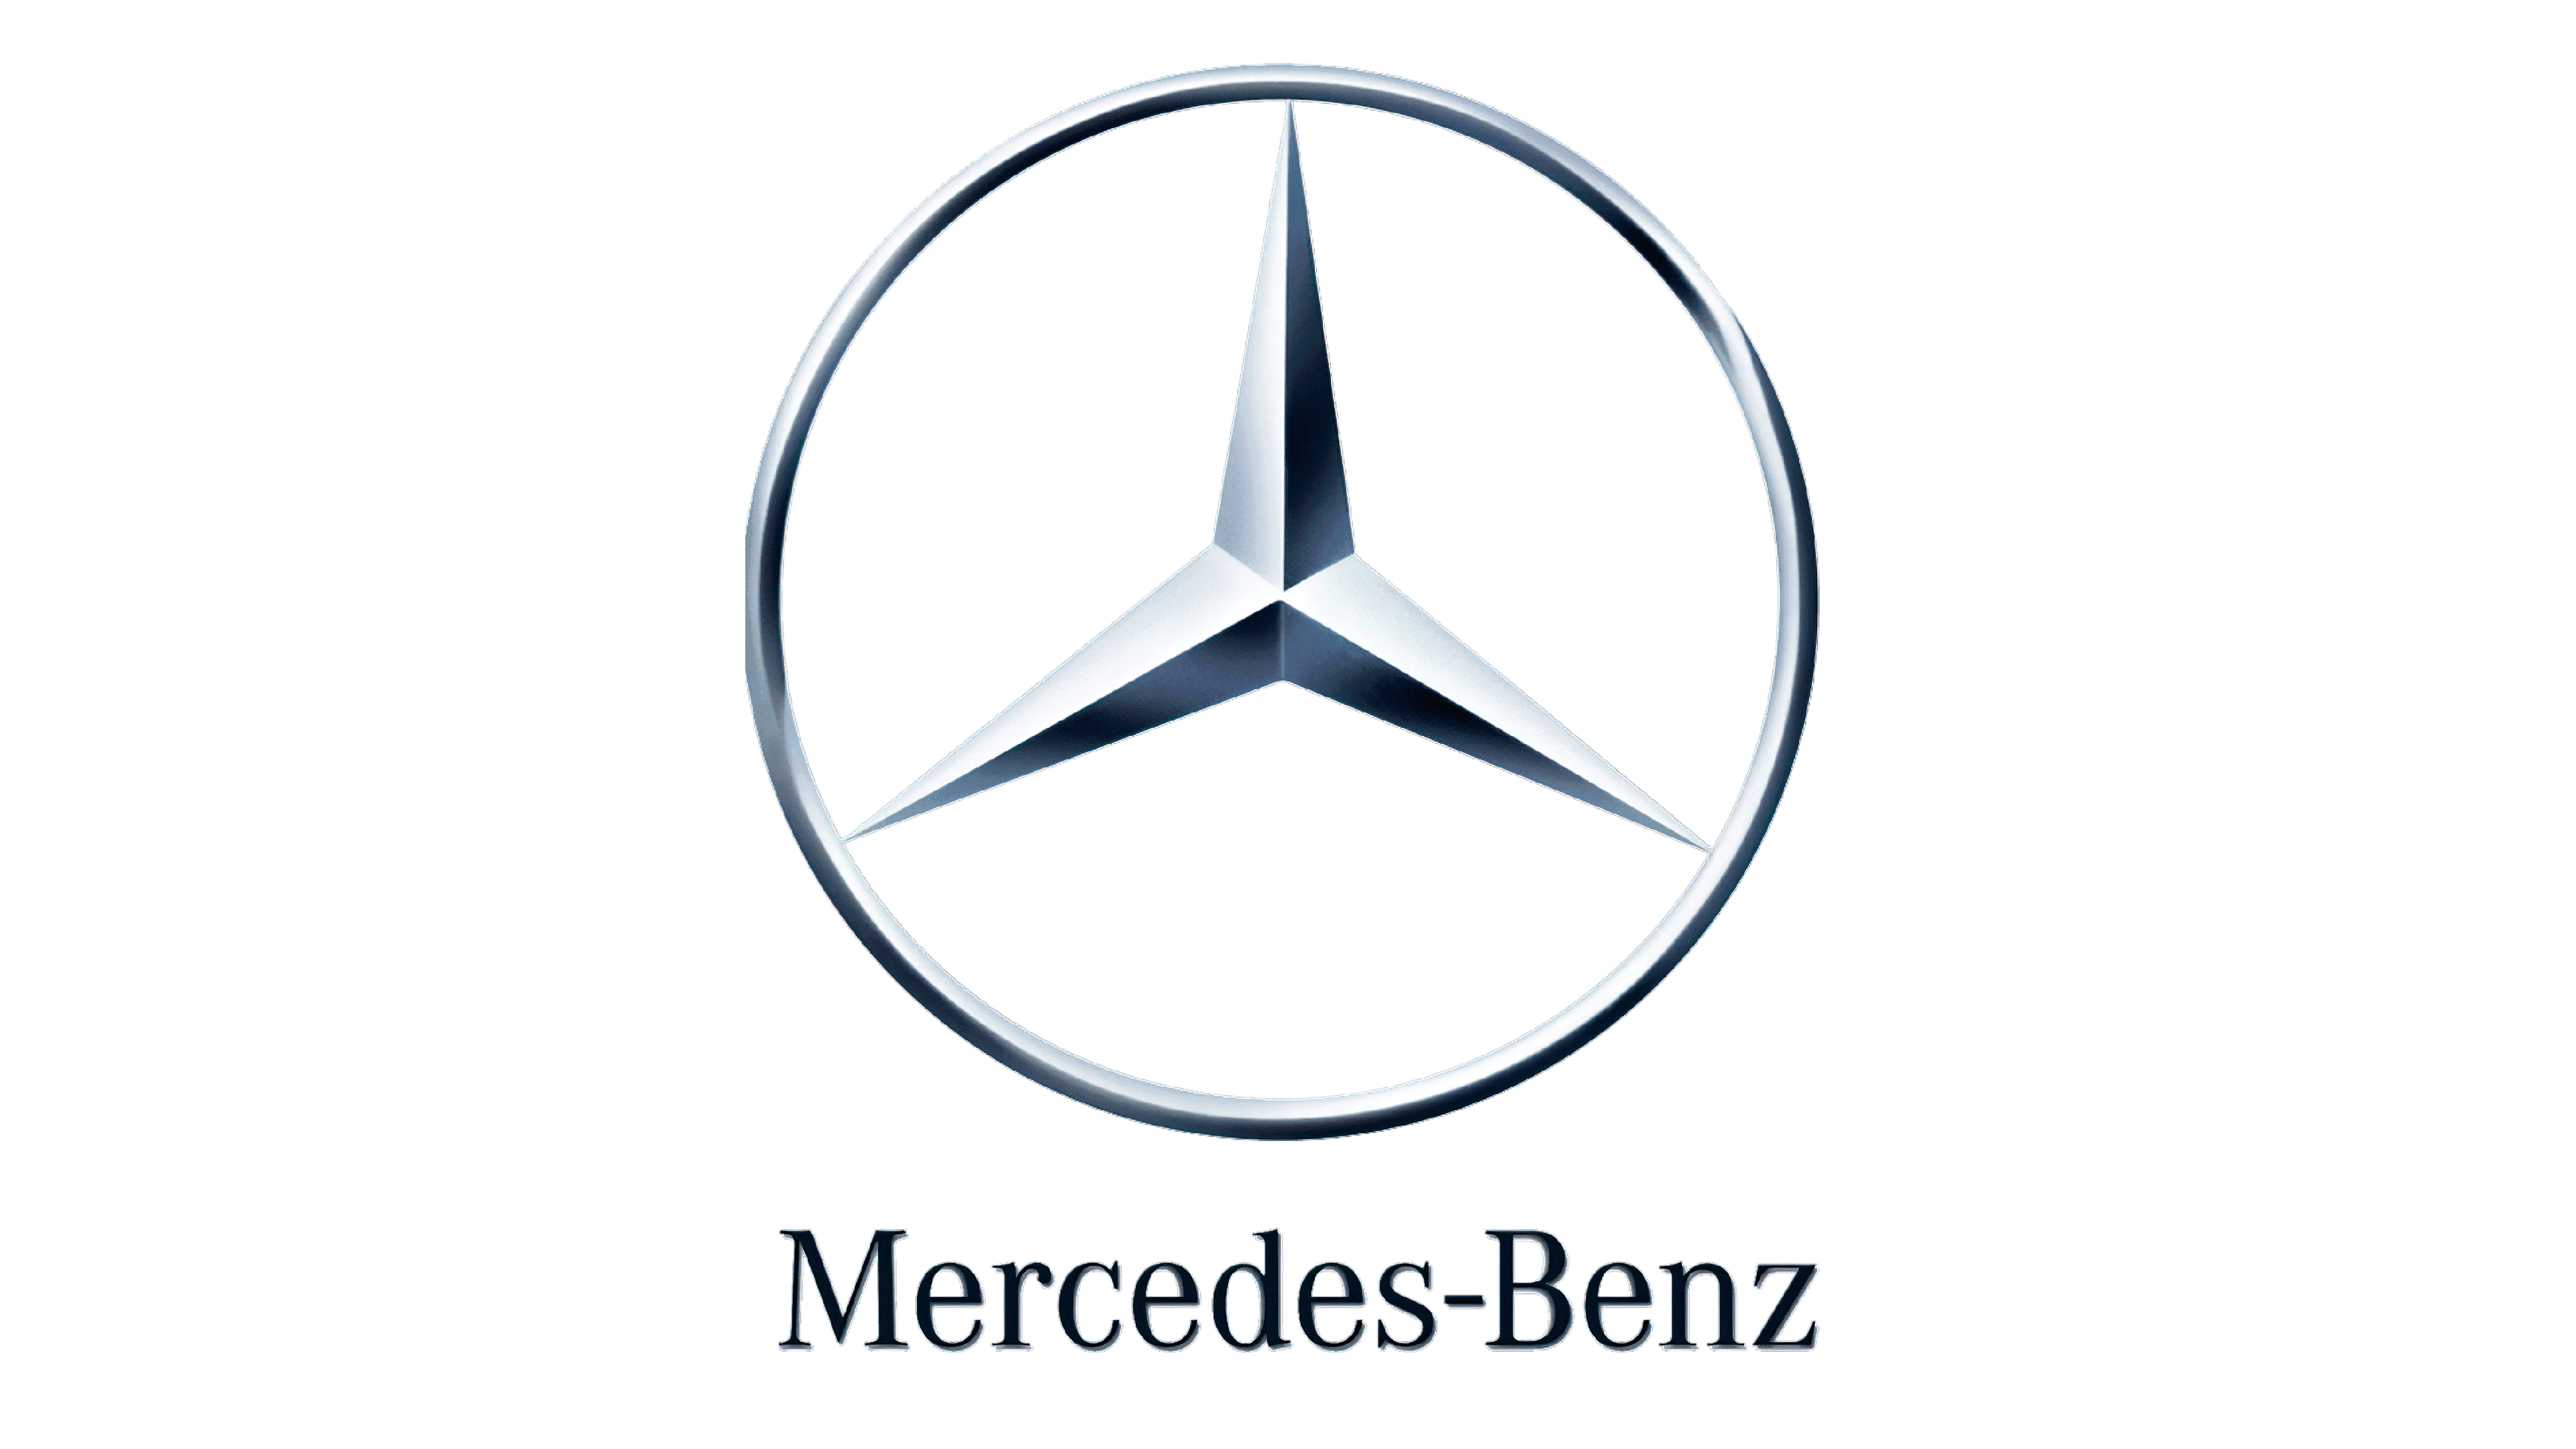 Mercedes Logo, Mercedes-Benz Car Symbol Meaning and History